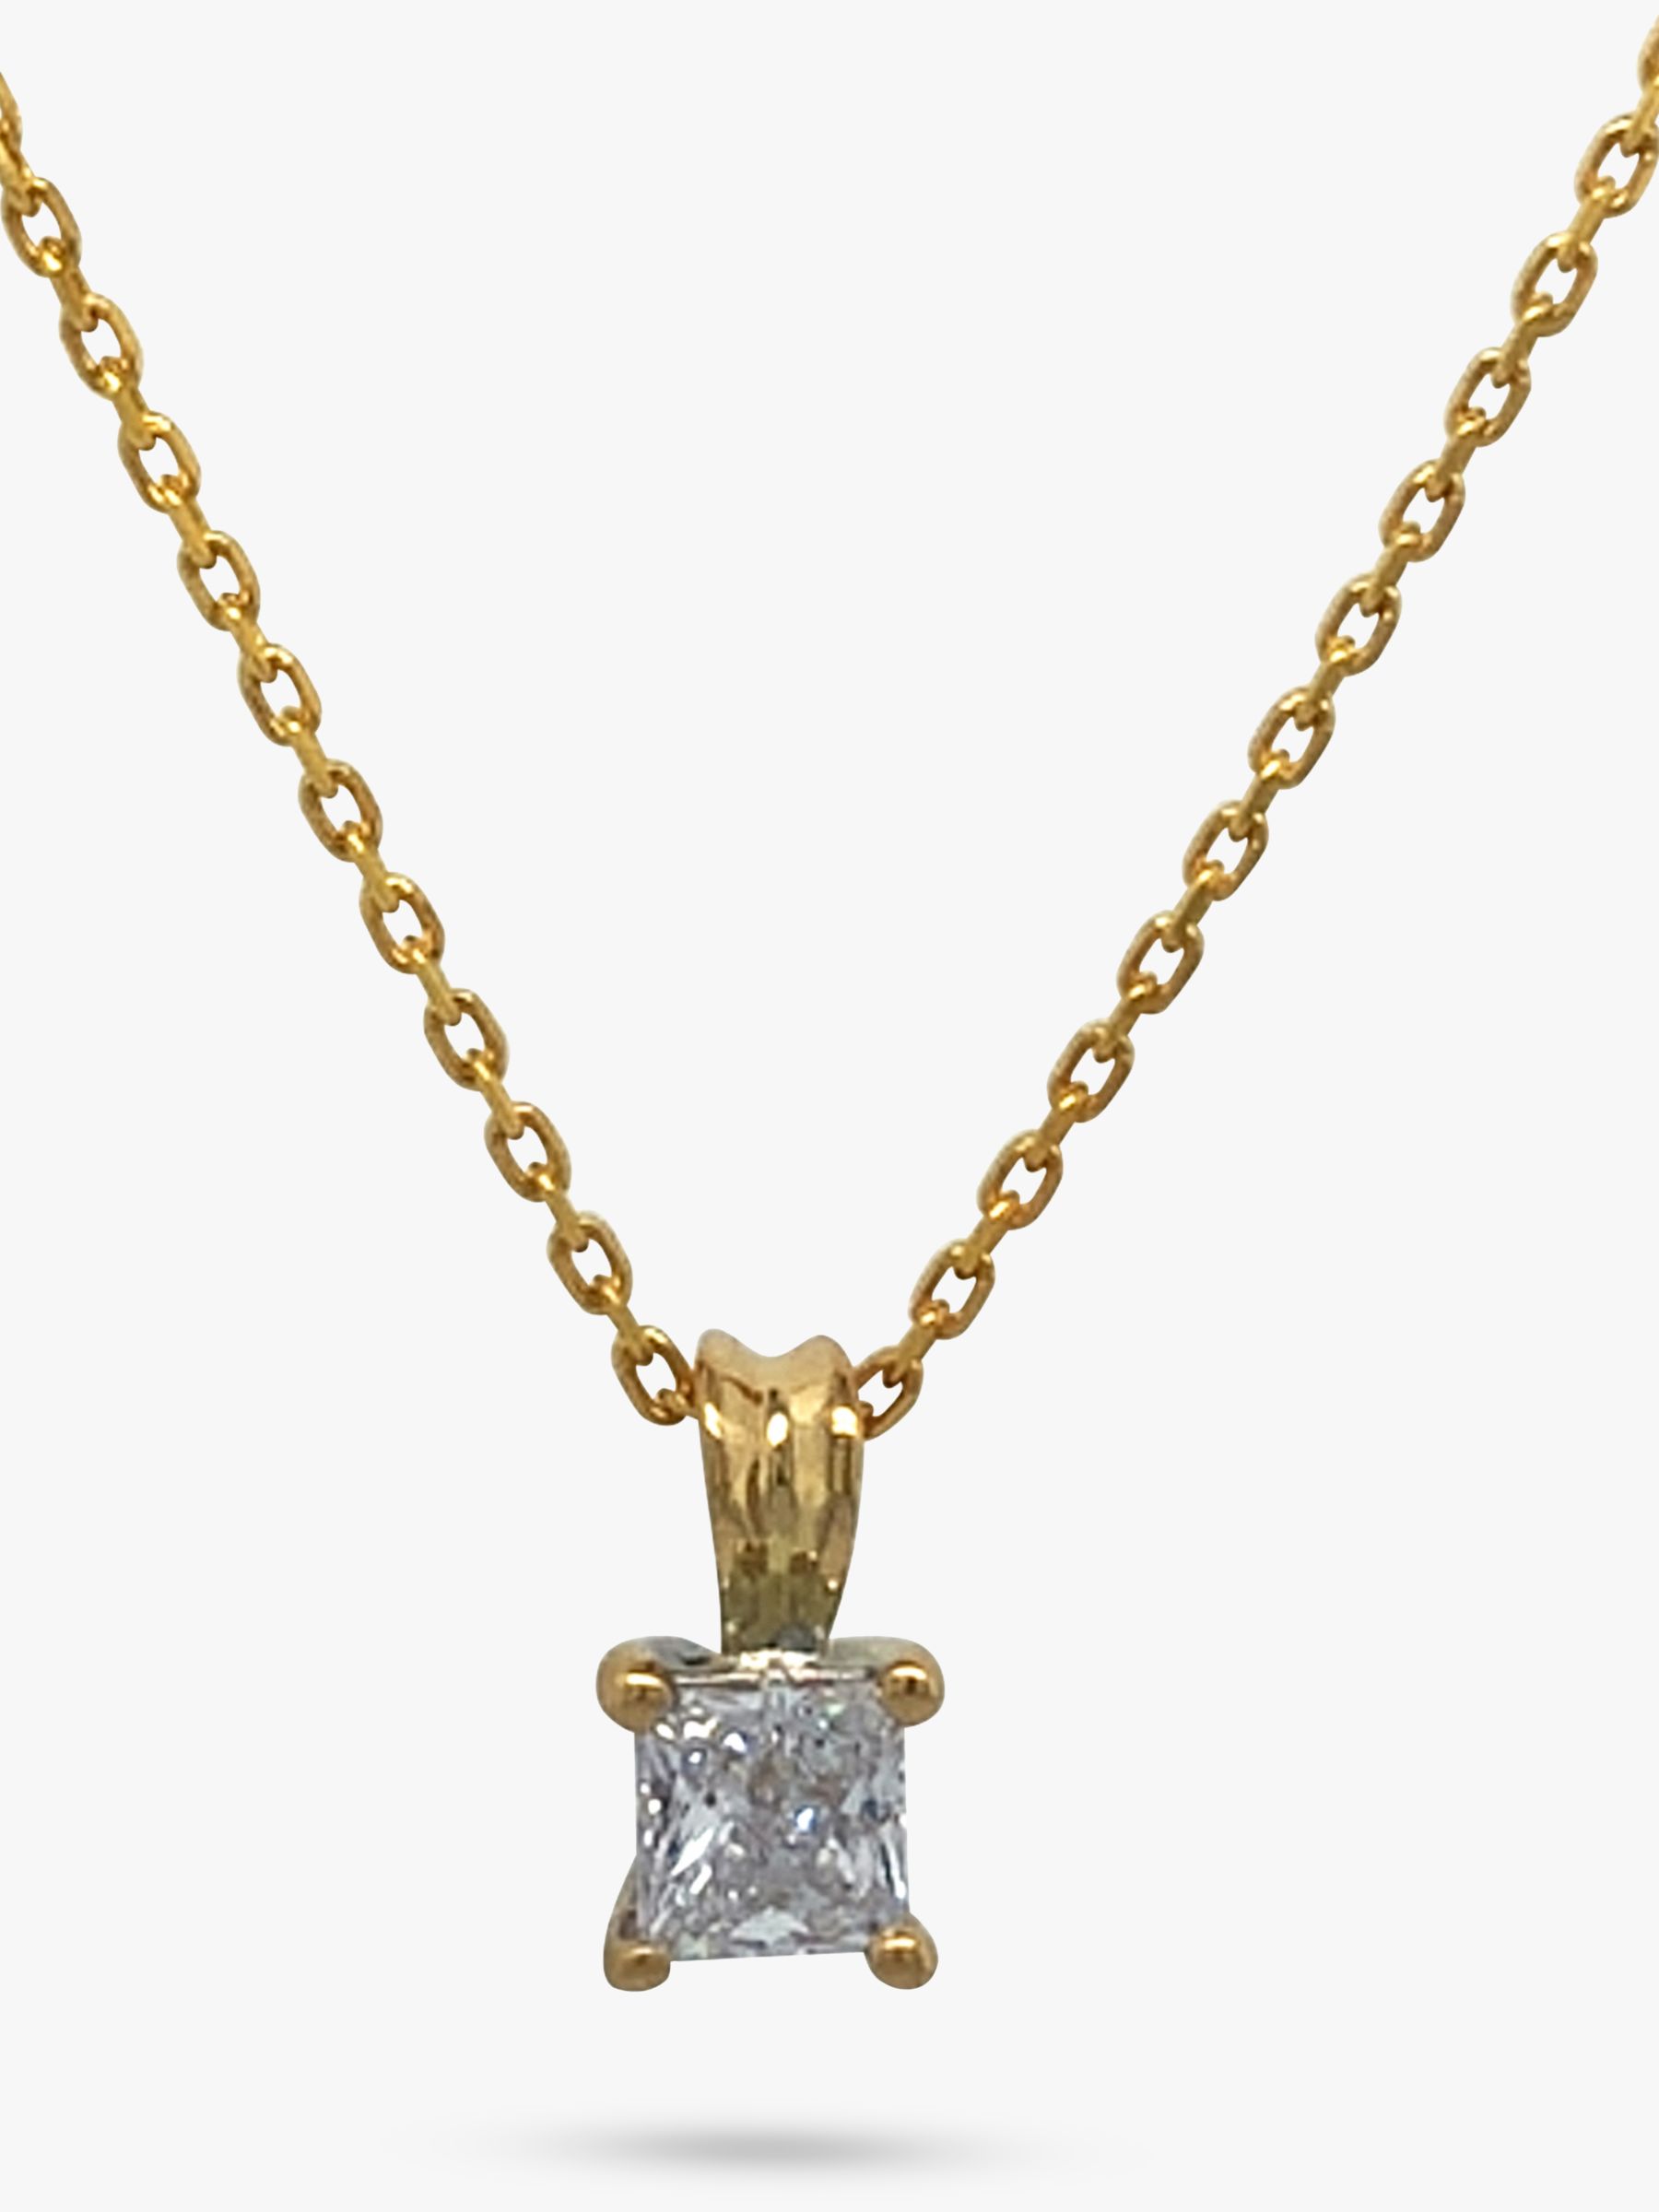 Vintage Fine Jewellery Second Hand 18ct Yellow & White Gold Diamond Pendant Necklace, Dated Circa 2000s